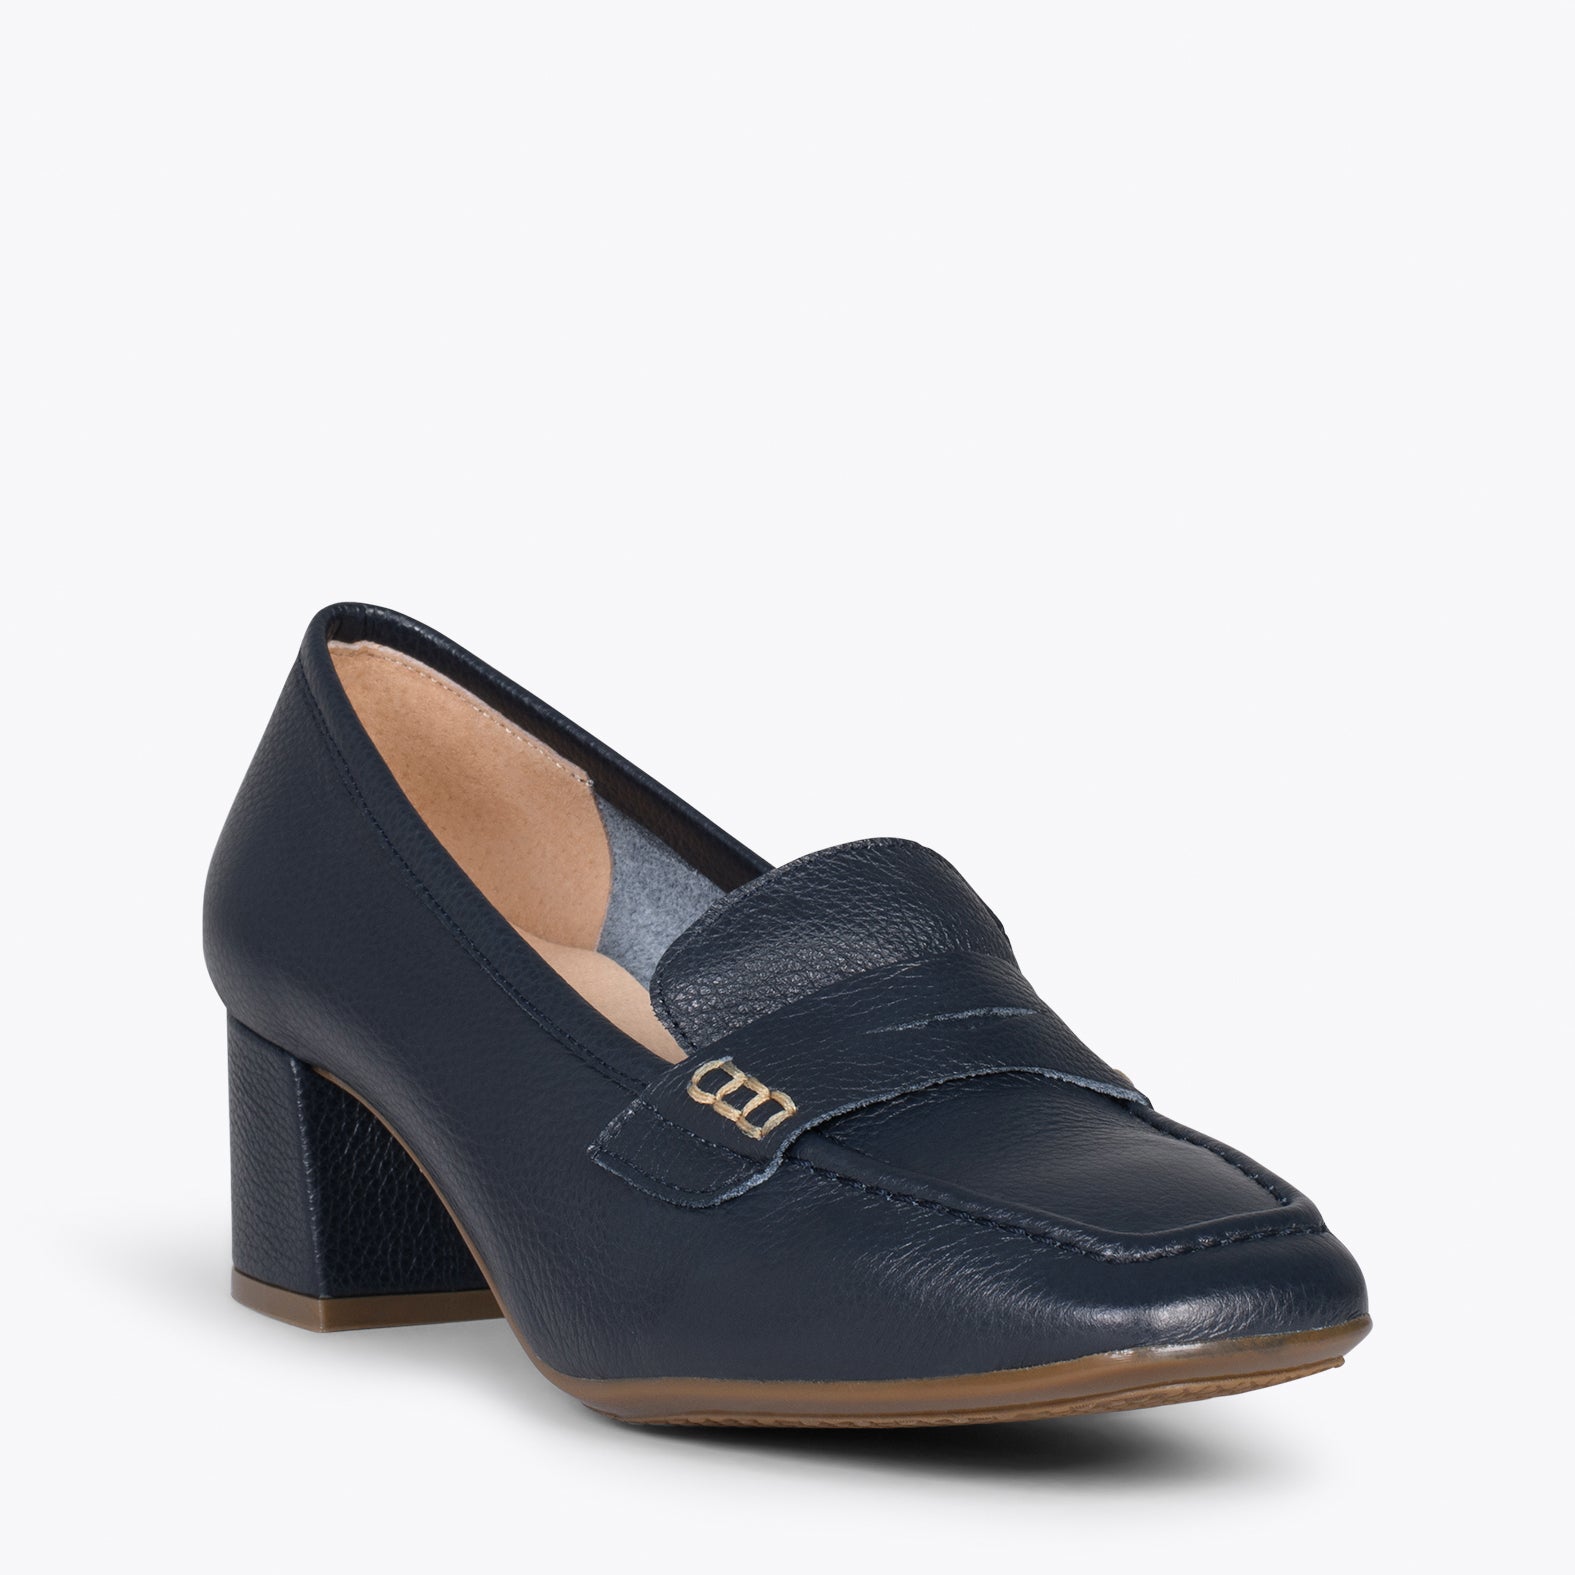 MASK HEEL - NAVY women's loafers with heel and mask